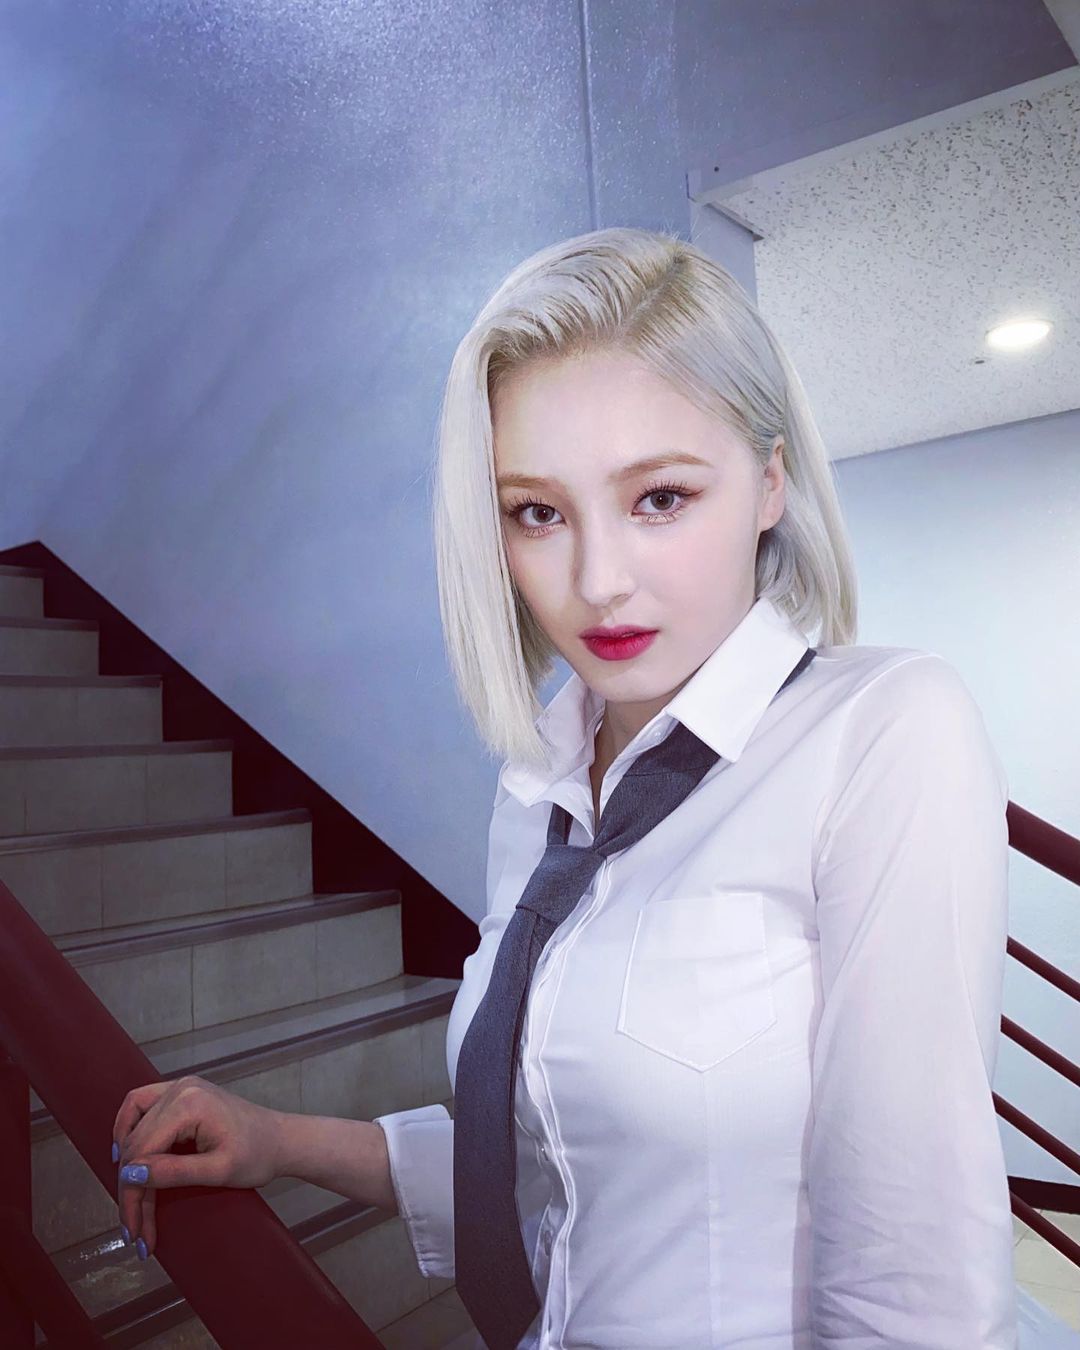 White haired Nancy Momoland in white shirt and black tie